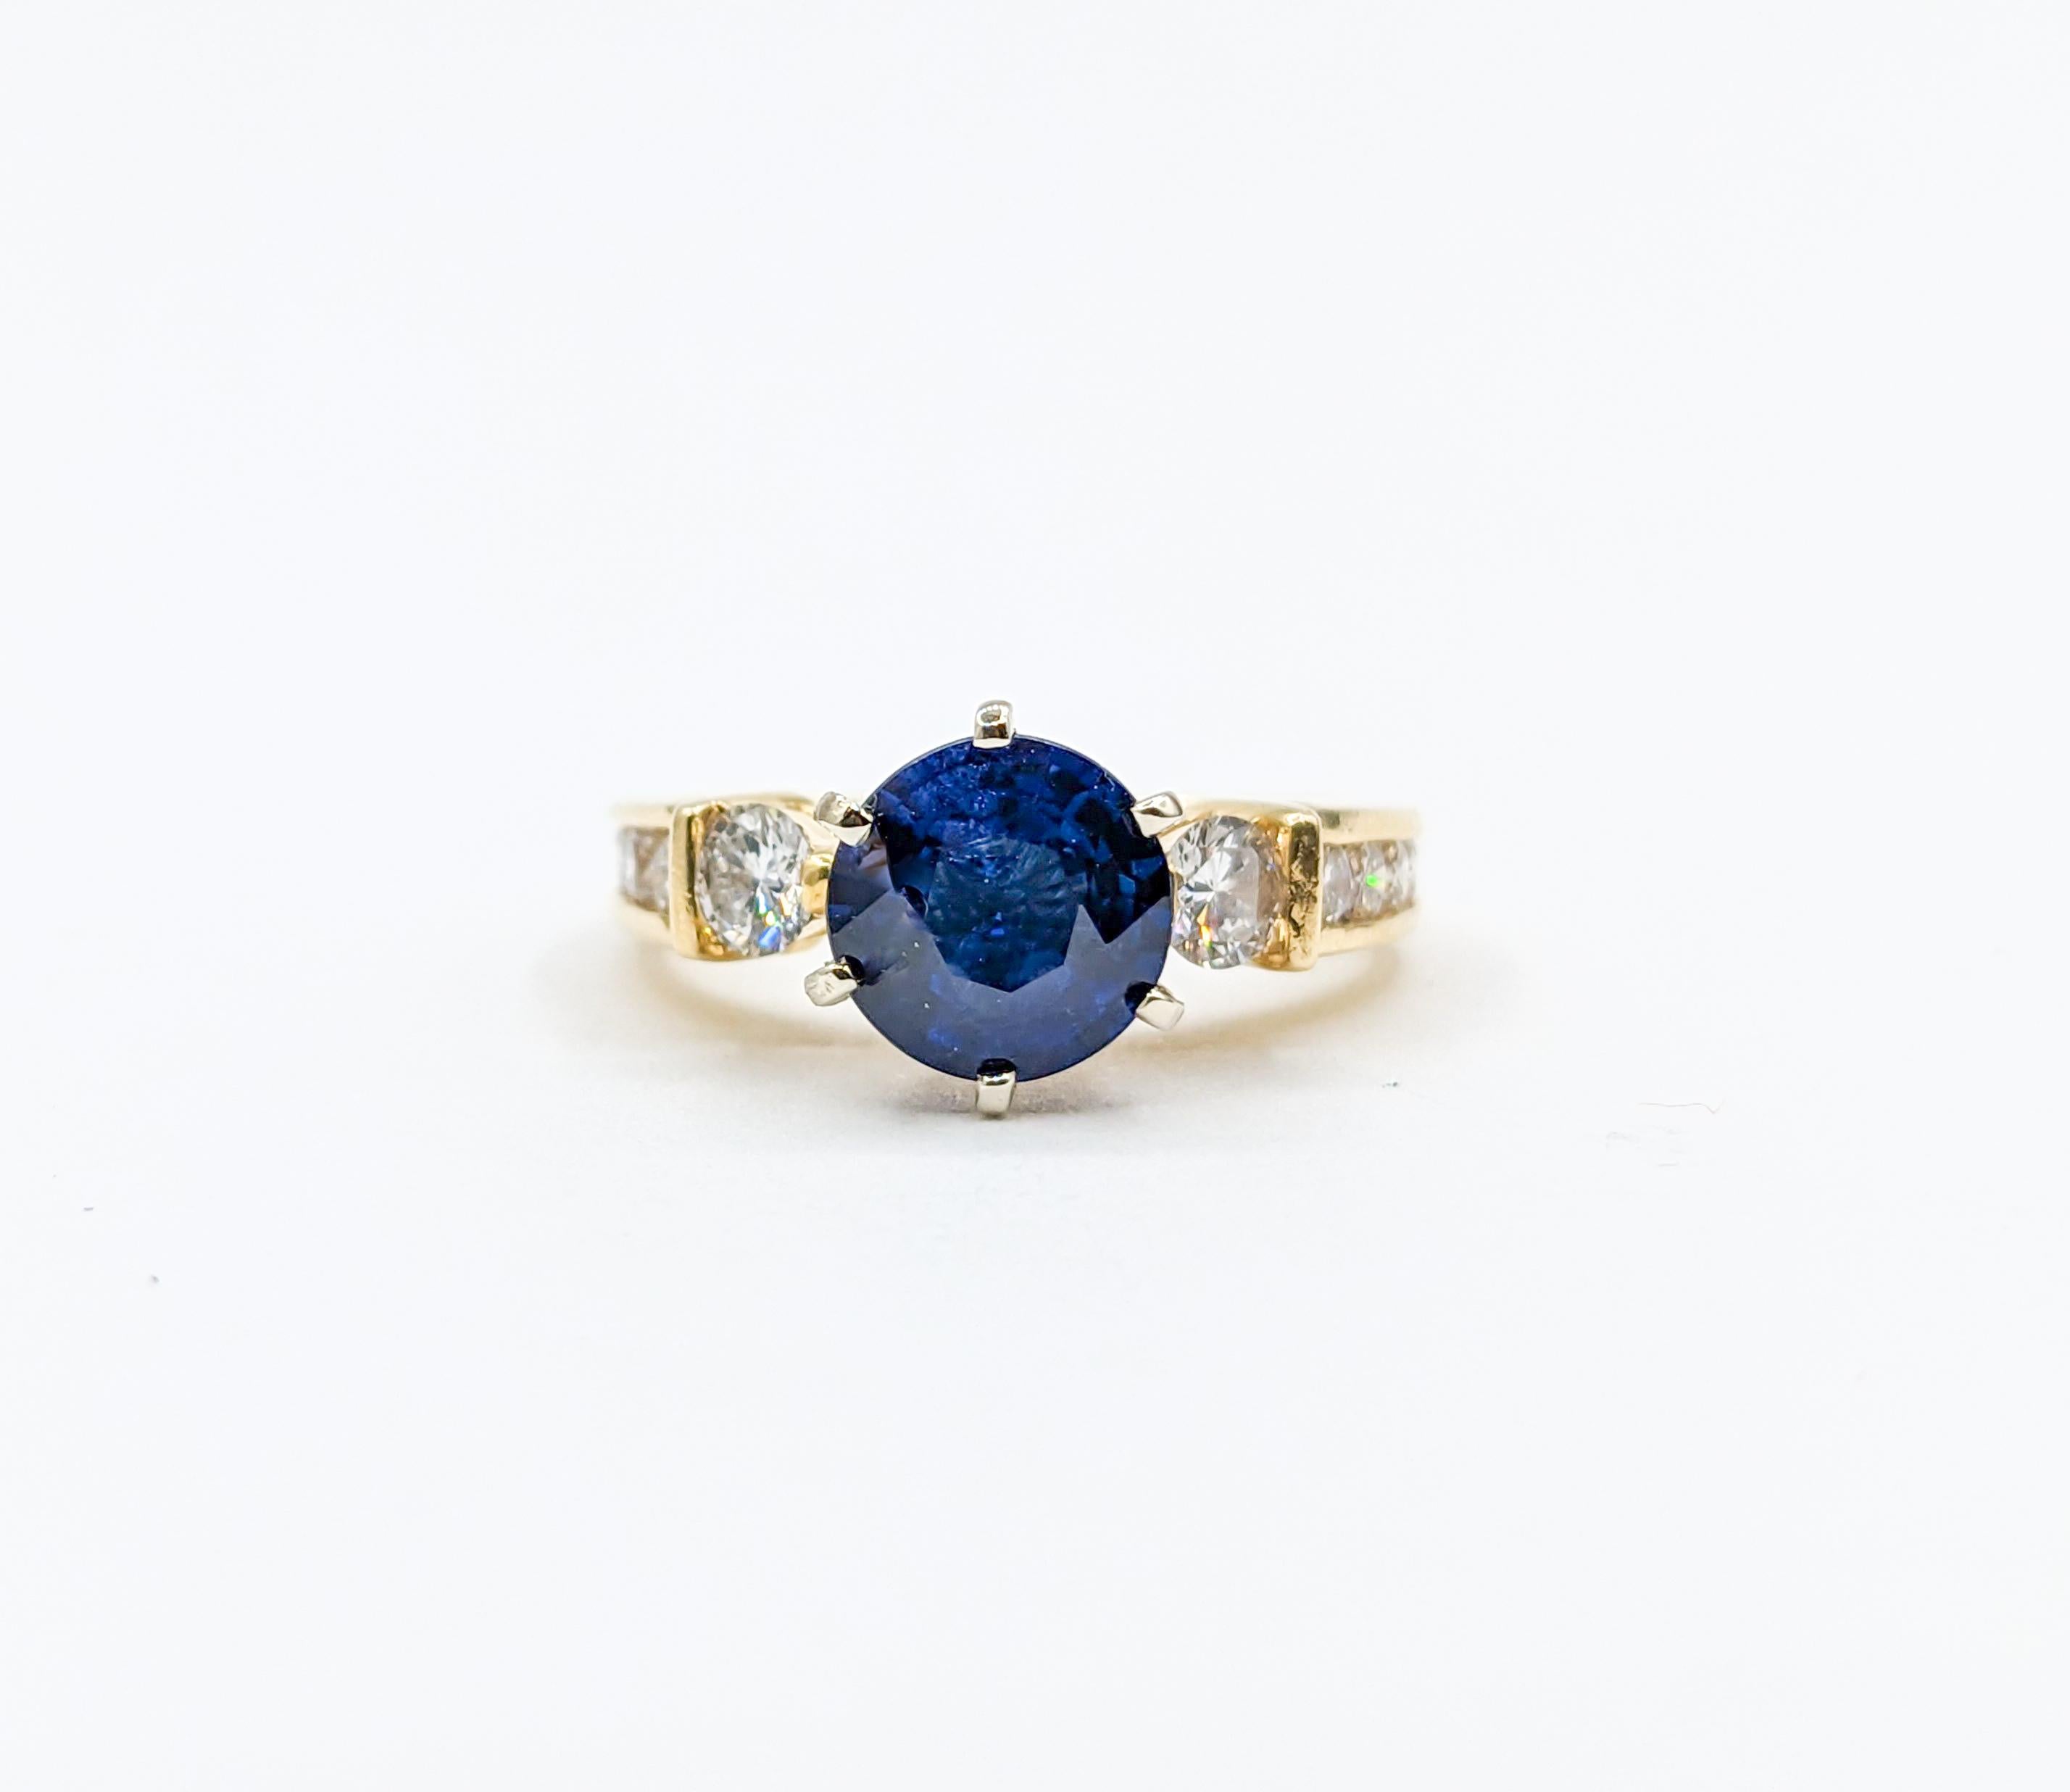 Classic Blue Sapphire & Diamond Engagement Ring

Indulge in luxury with this exquisite engagement ring crafted in 14kt yellow gold. It features a brilliant combination of 0.55 carats total weight of round diamonds that sparkle with SI1 clarity and H